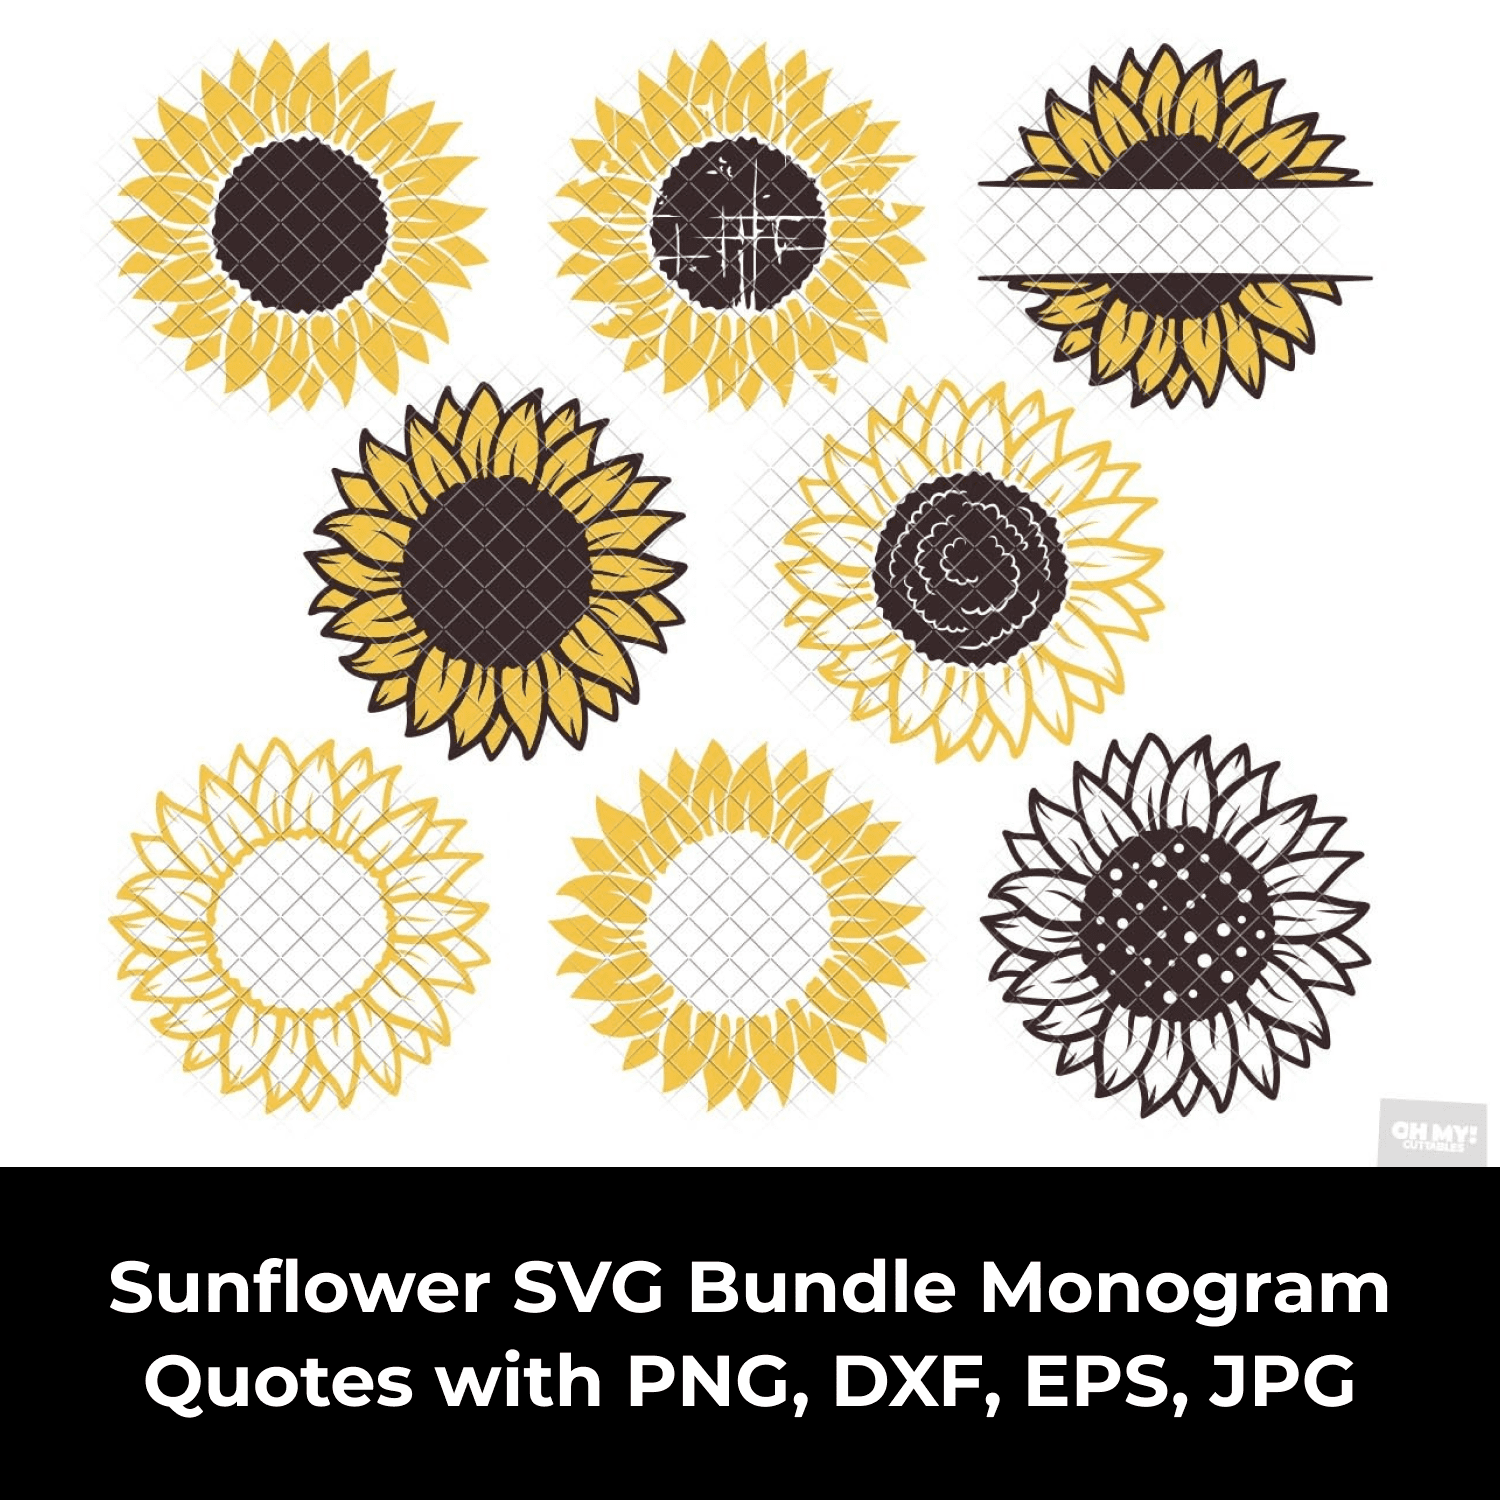 Sunflower SVG Bundle Monogram Quotes with PNG, DXF, EPS, JPG cover.